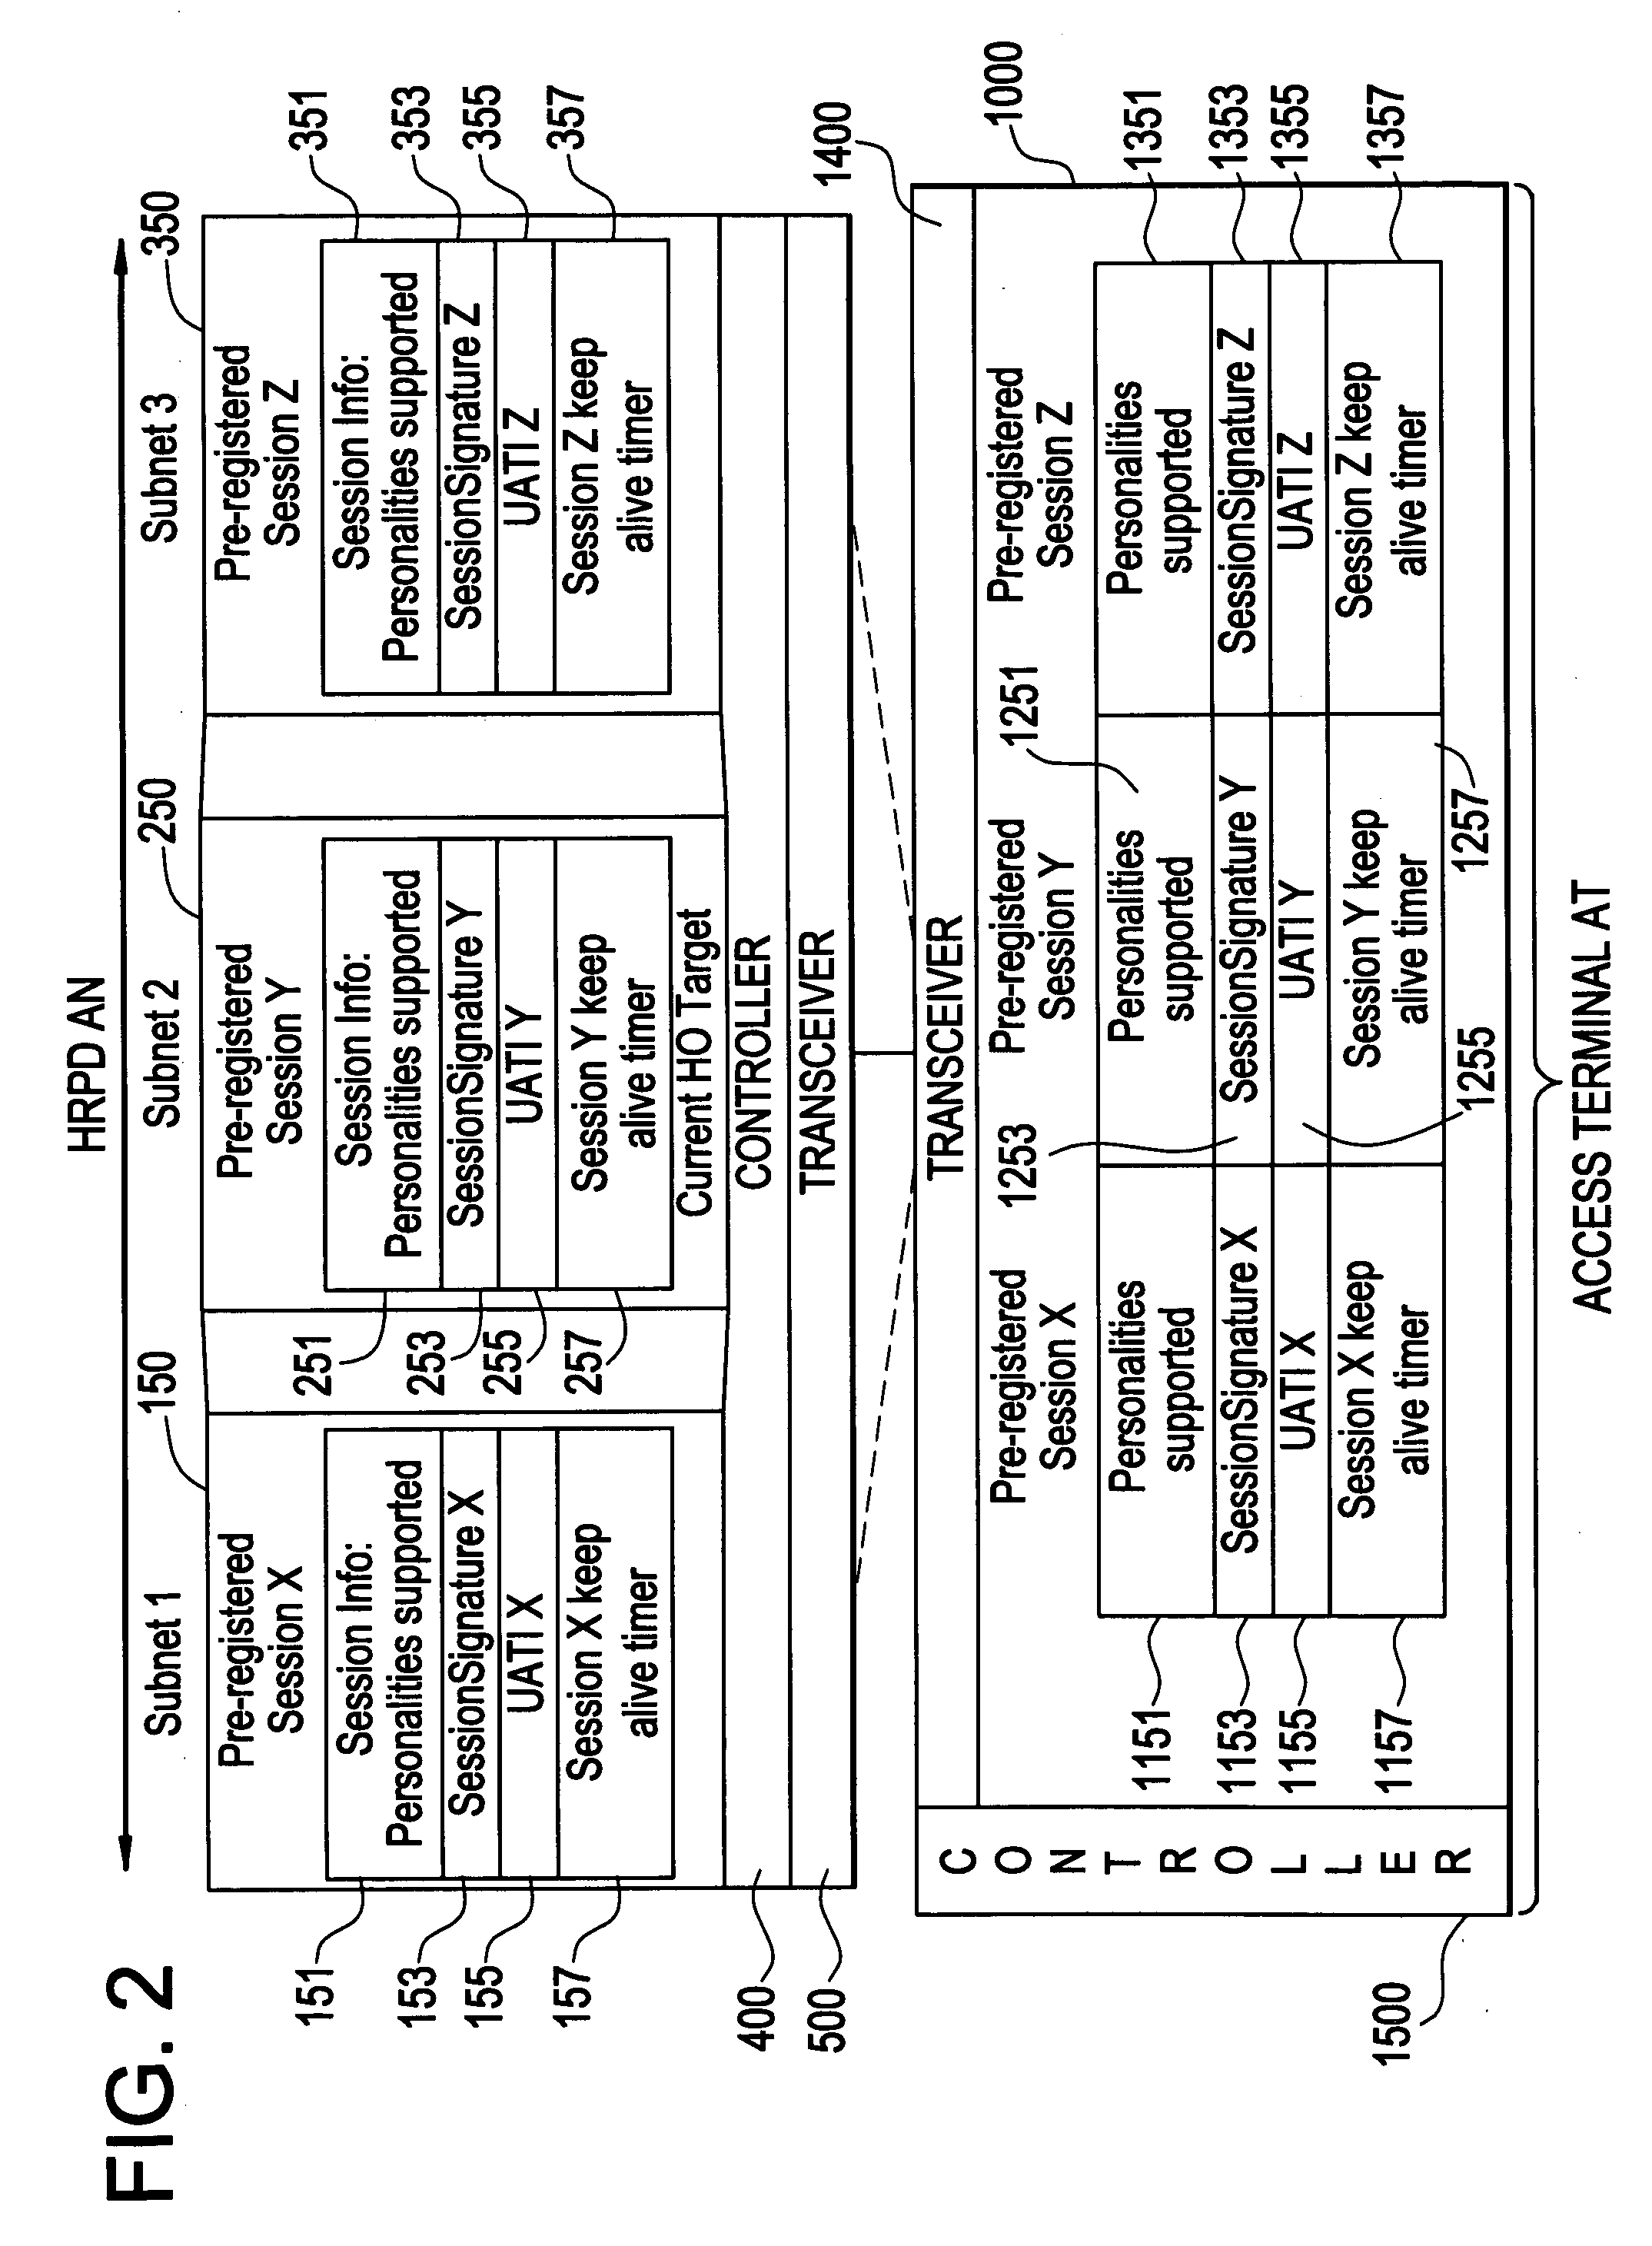 Pre-registration, storing of pre-registration session information and session transfer in a wireless communication system